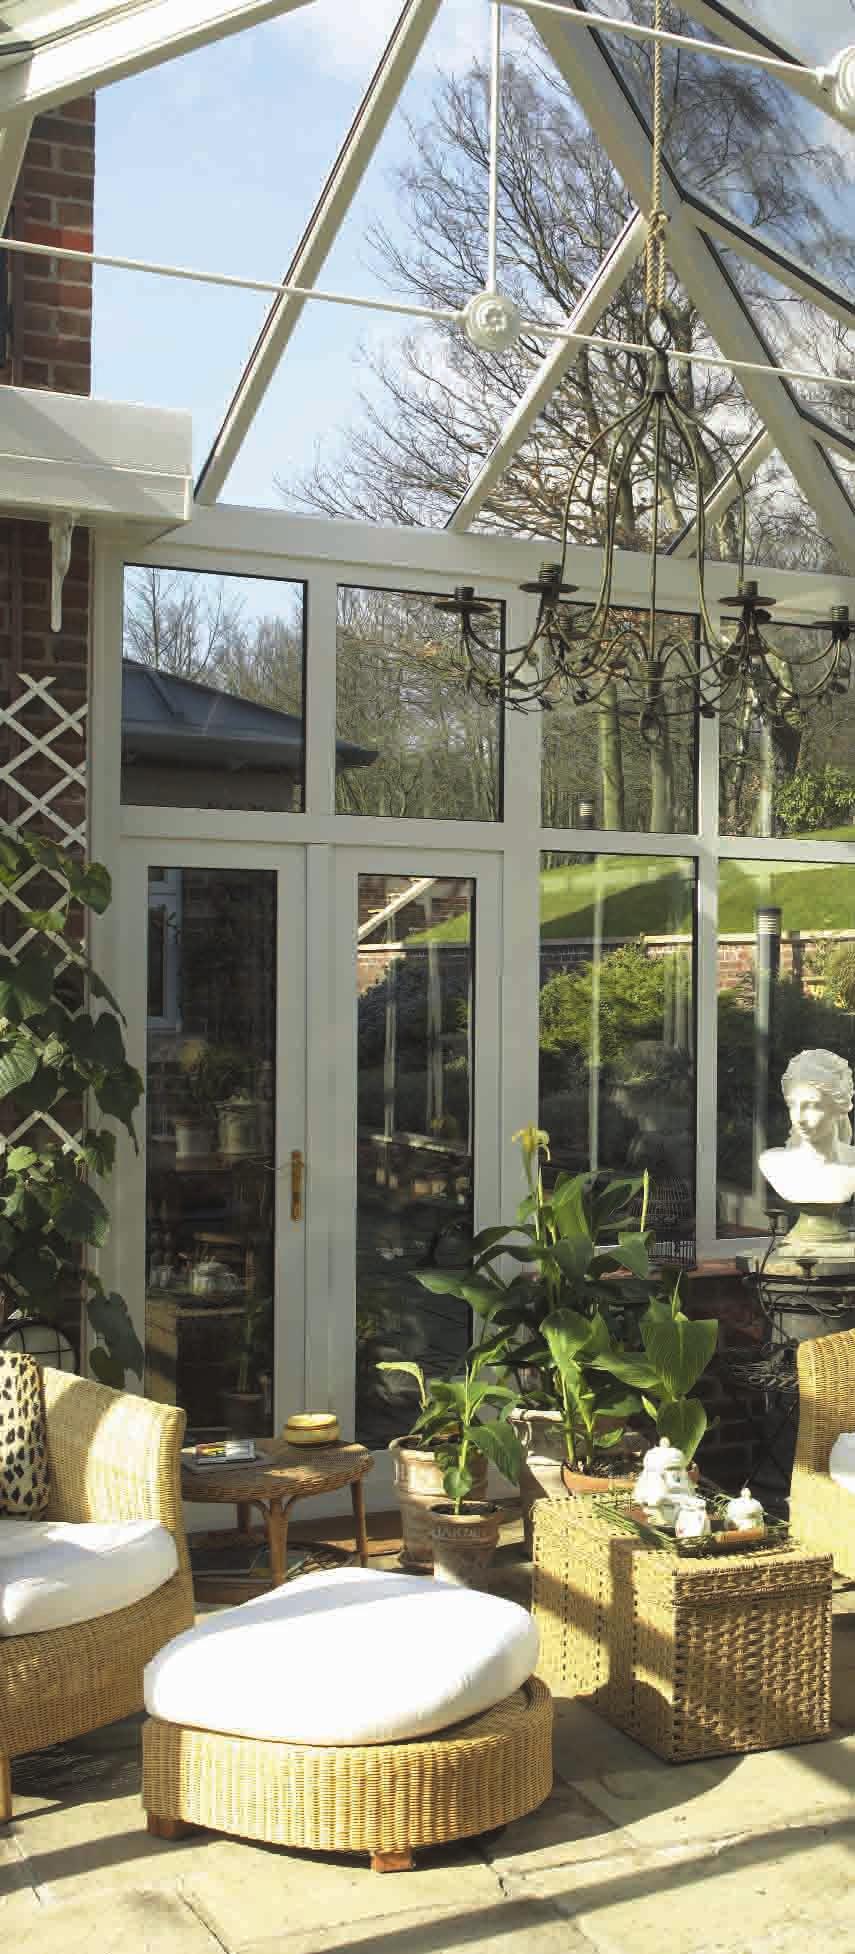 C onservatories P eople choose a double glazed PVCu conservatory to extend their home to provide extra space maybe for a